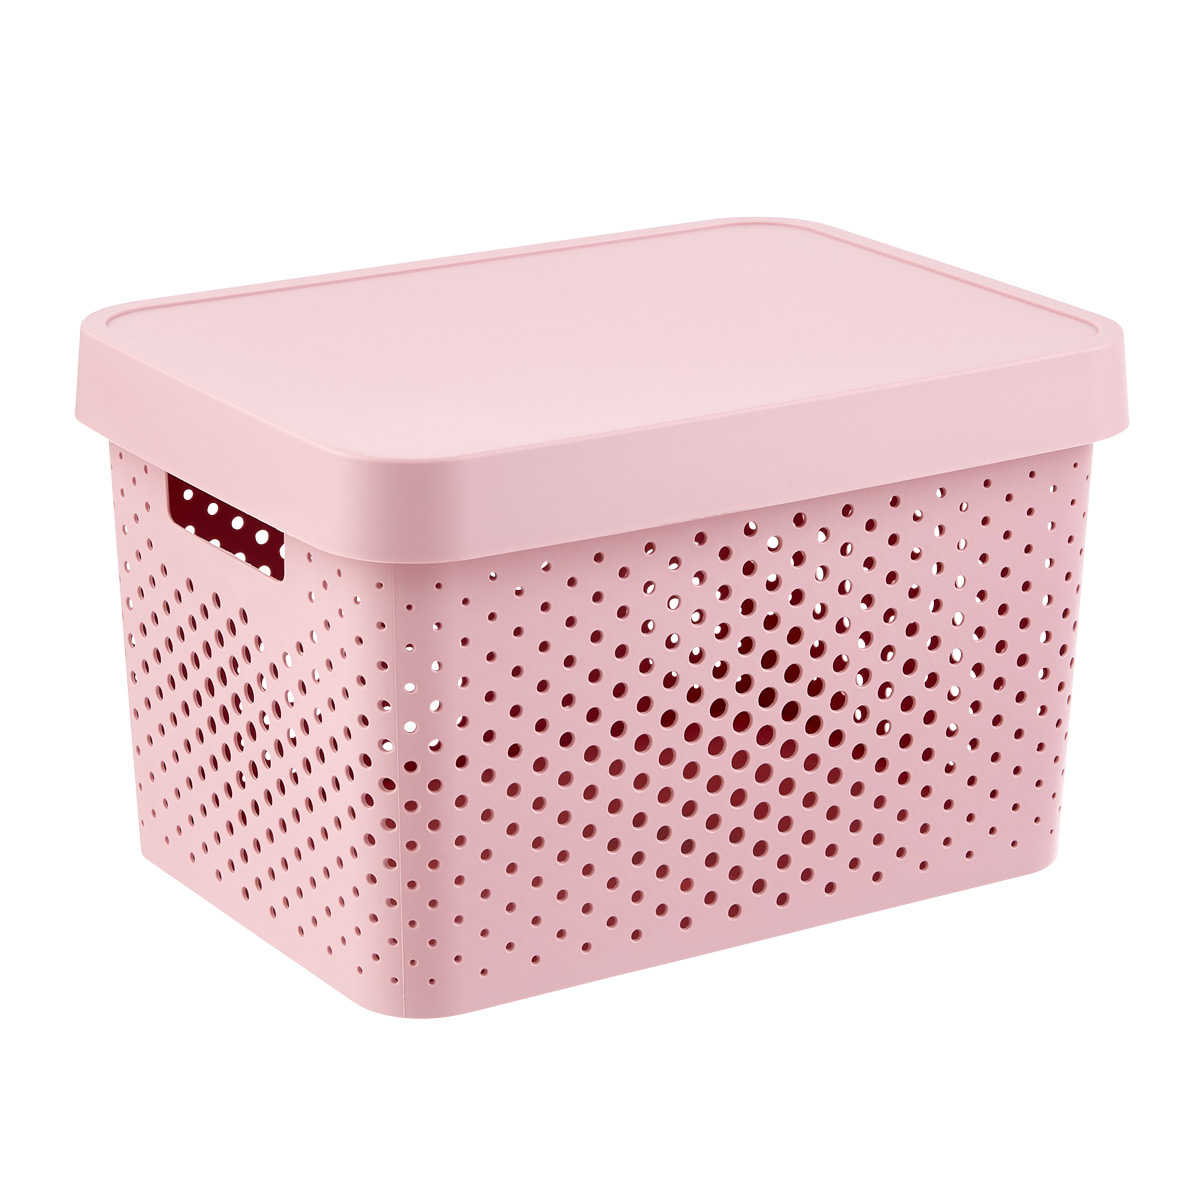 https://www.containerstore.com/catalogimages/408245/10083378_curver_large_infinity_box_w.jpg